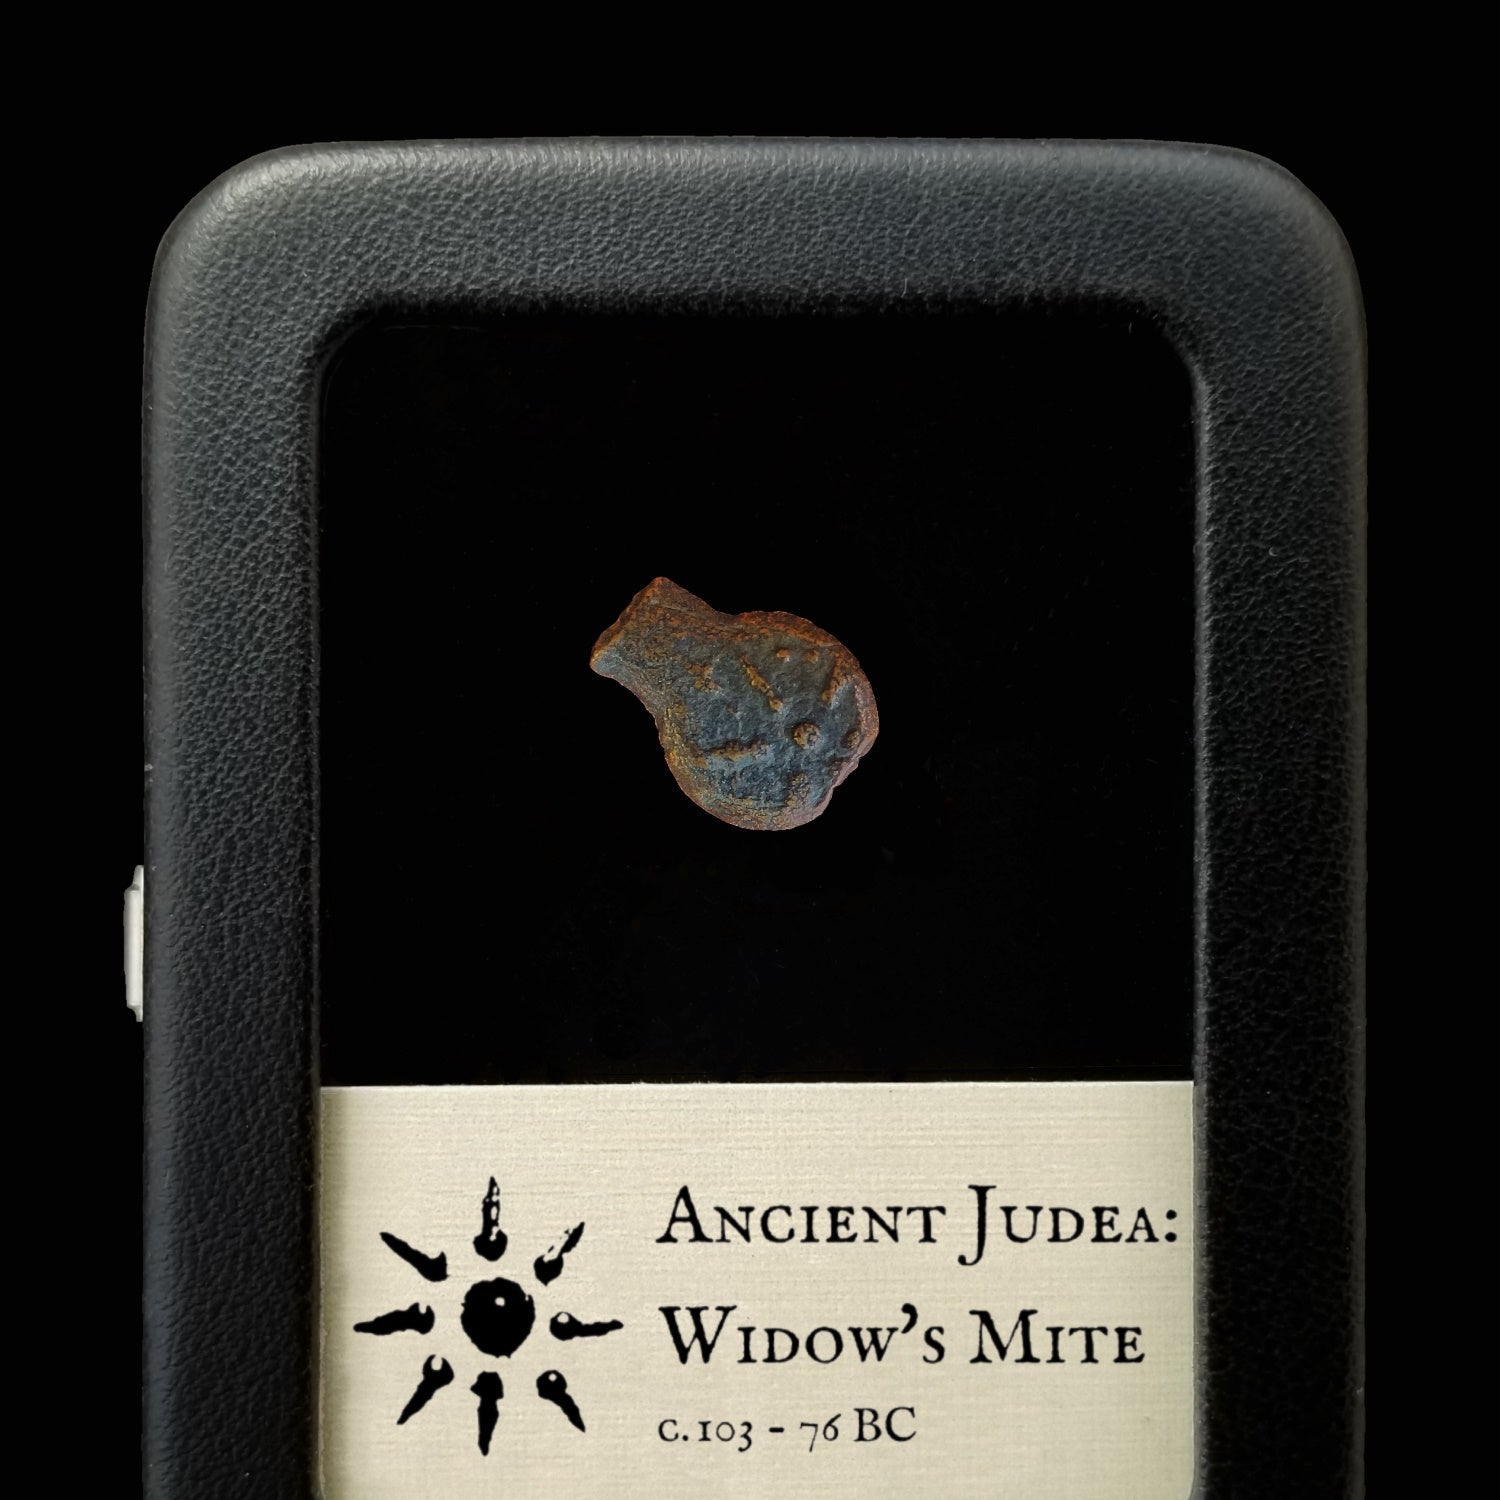 Widow's Mite, Biblical Judea - 103 BC - Middle East